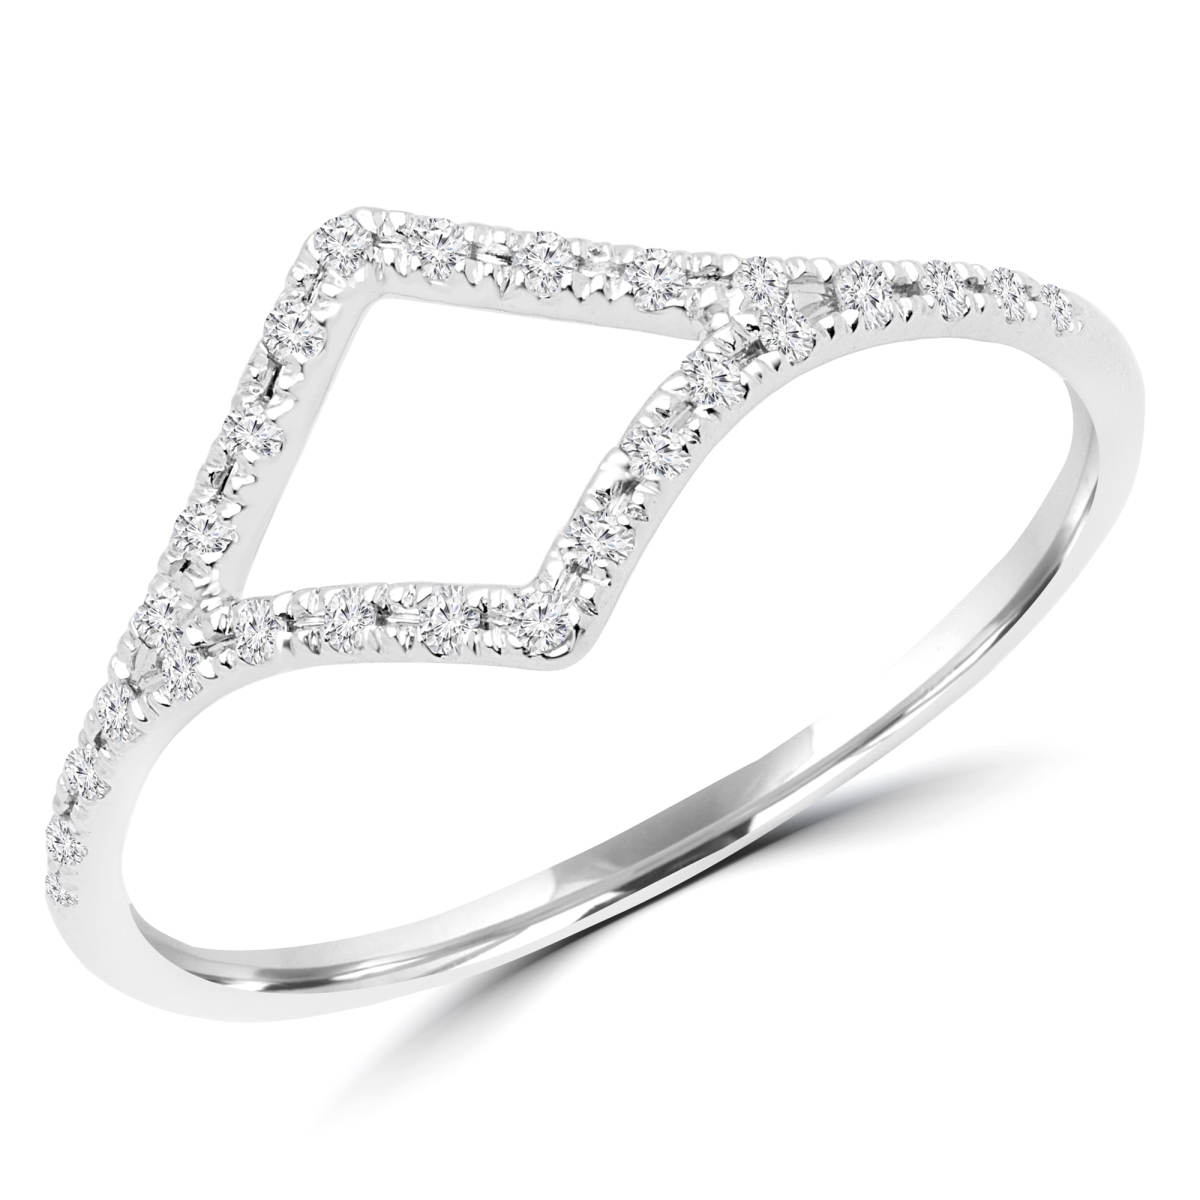 Picture of Majesty Diamonds MDR170053-3.5 0.1 CTW Round Diamond Cocktail Ring in 14K White Gold - 3.5